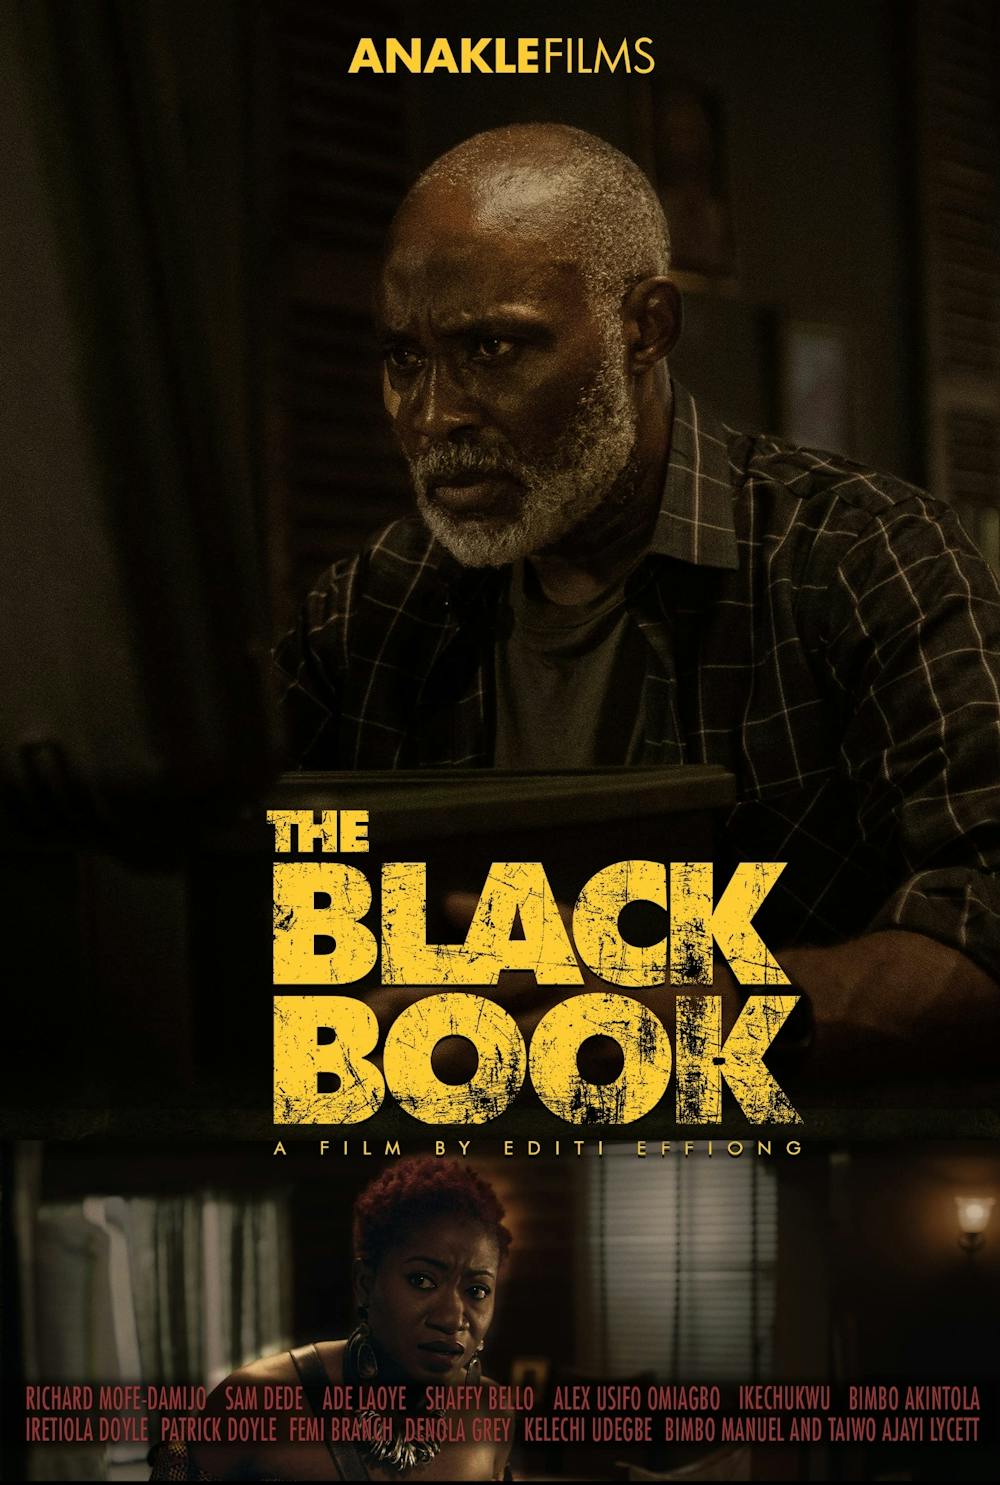 The Black Book is a gritty new thriller that raises the bar for Nollywood